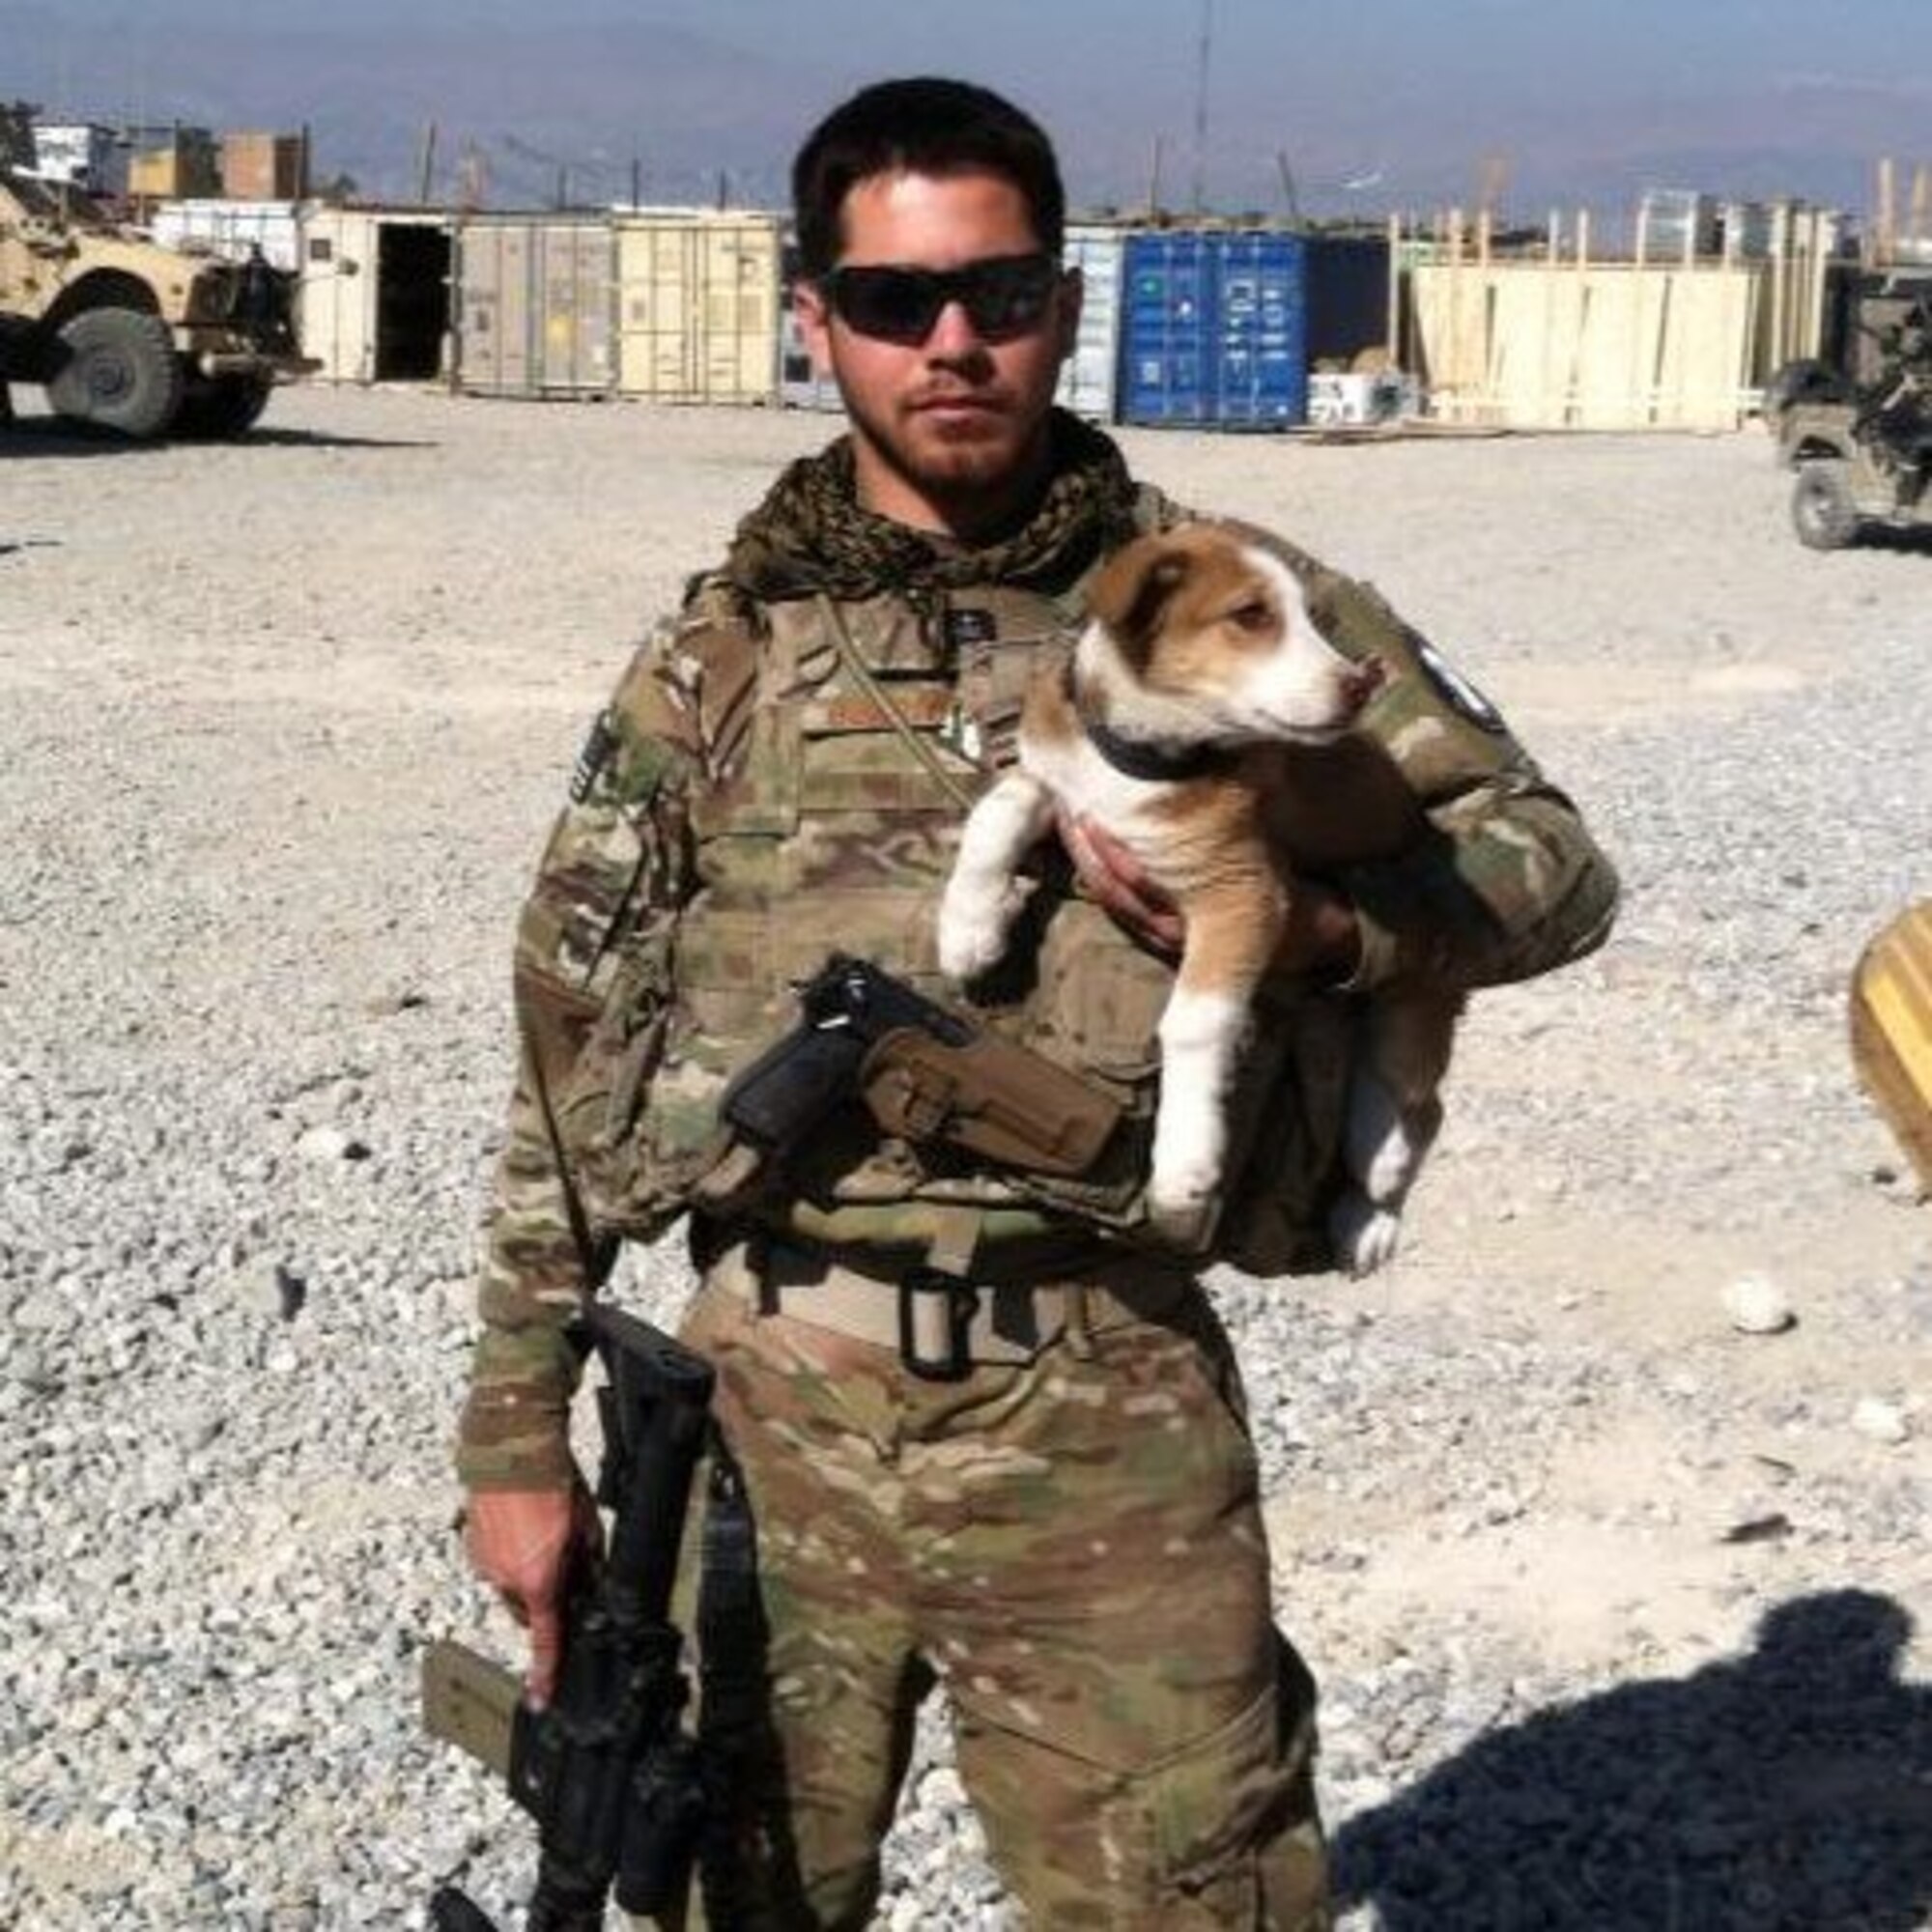 Staff Sgt. Thomas Burright, 7th Logistics Readiness Squadron, poses for a photo with his dog Lyla during his recent deployment to Afghanistan. Embedded as a vehicle mechanic with a unit of Army Green Berets, Burright was the only Air Force servicemember stationed at their outpost. (Courtesy photo)